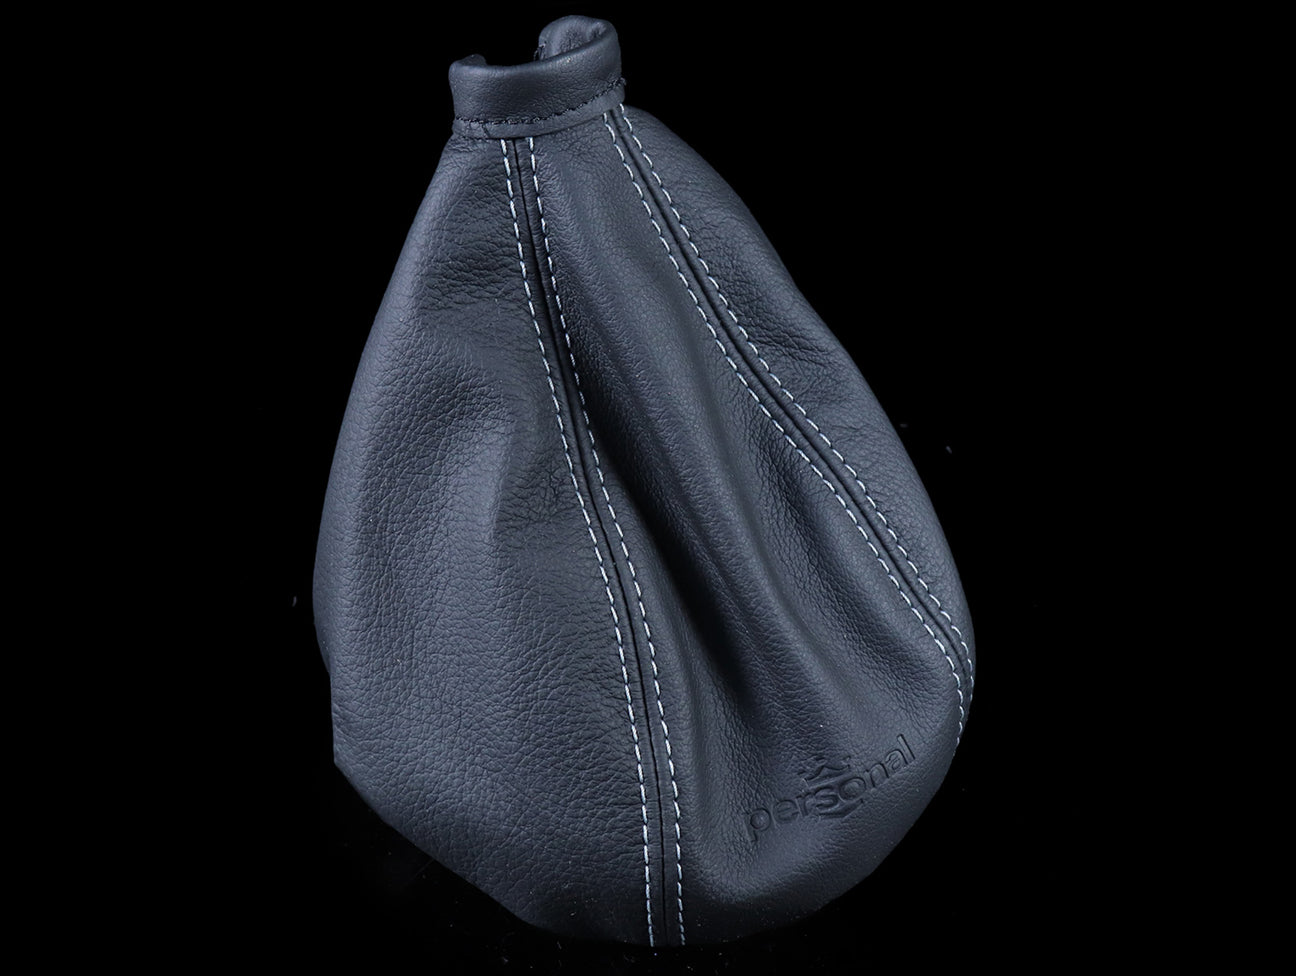 Personal Gaiter Shift Boot - Black Leather